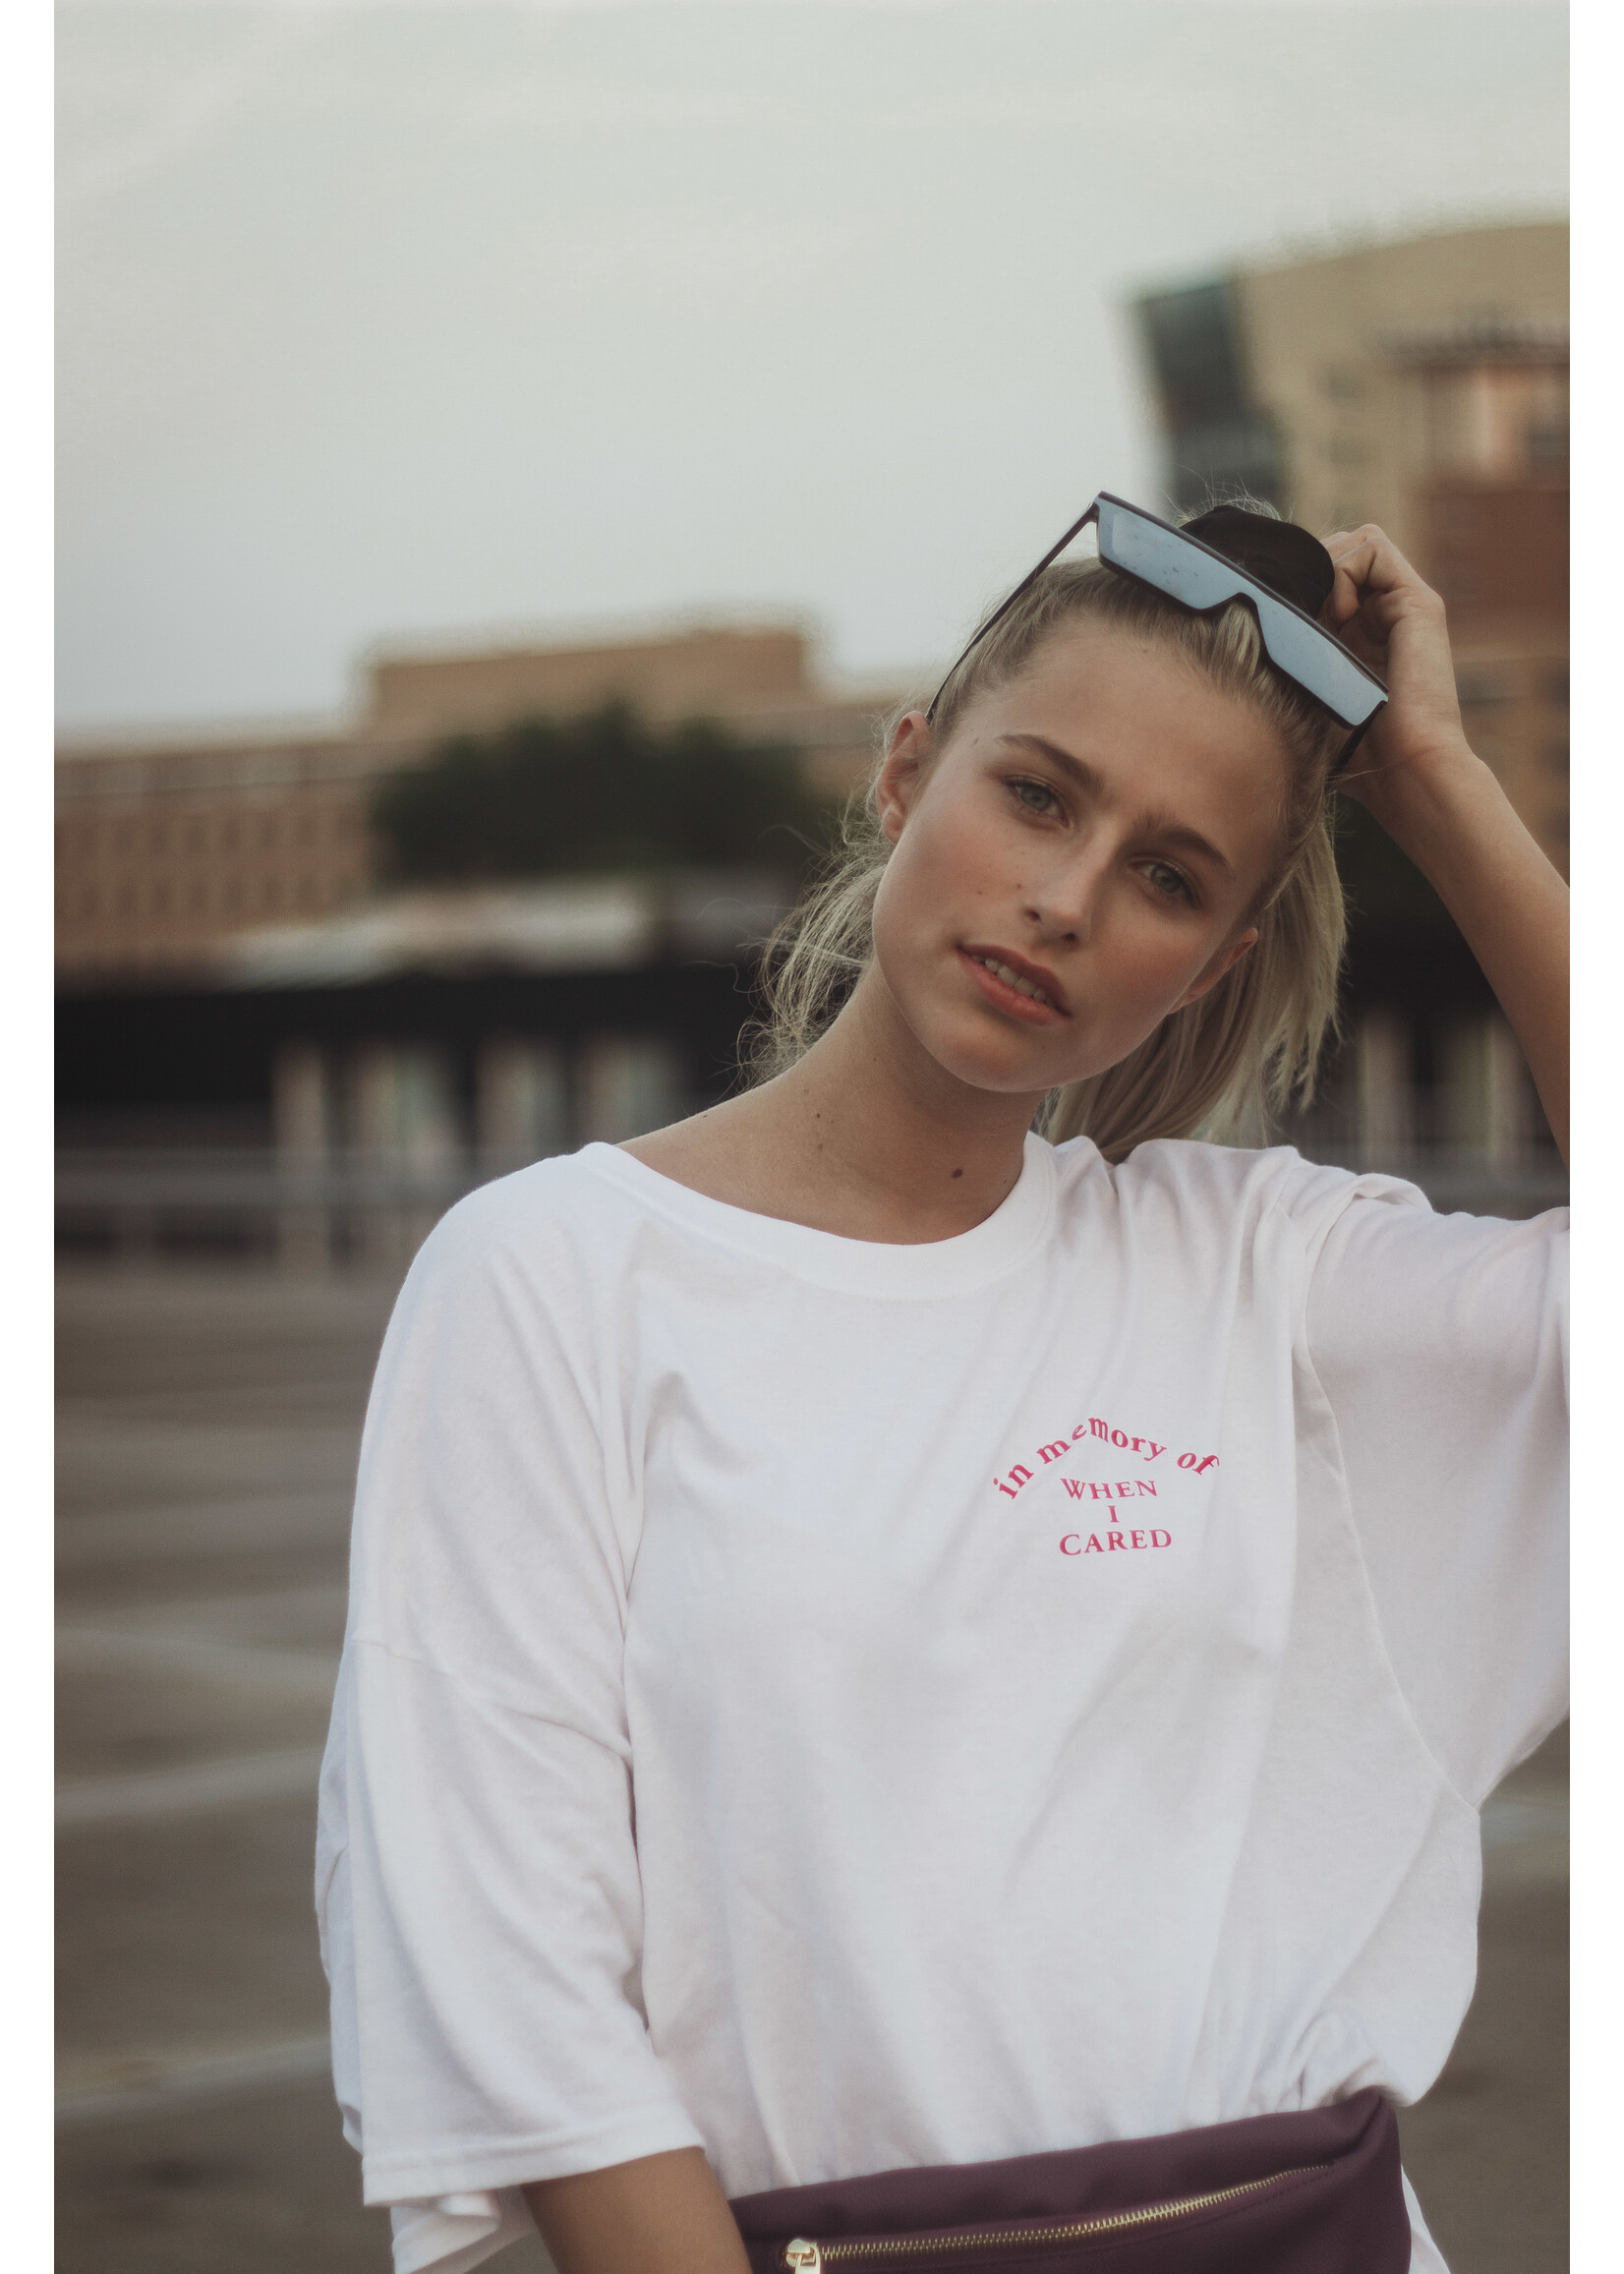 YOU ARE SPECIAL "In Memory Of When I Cared" White T-shirt Dress